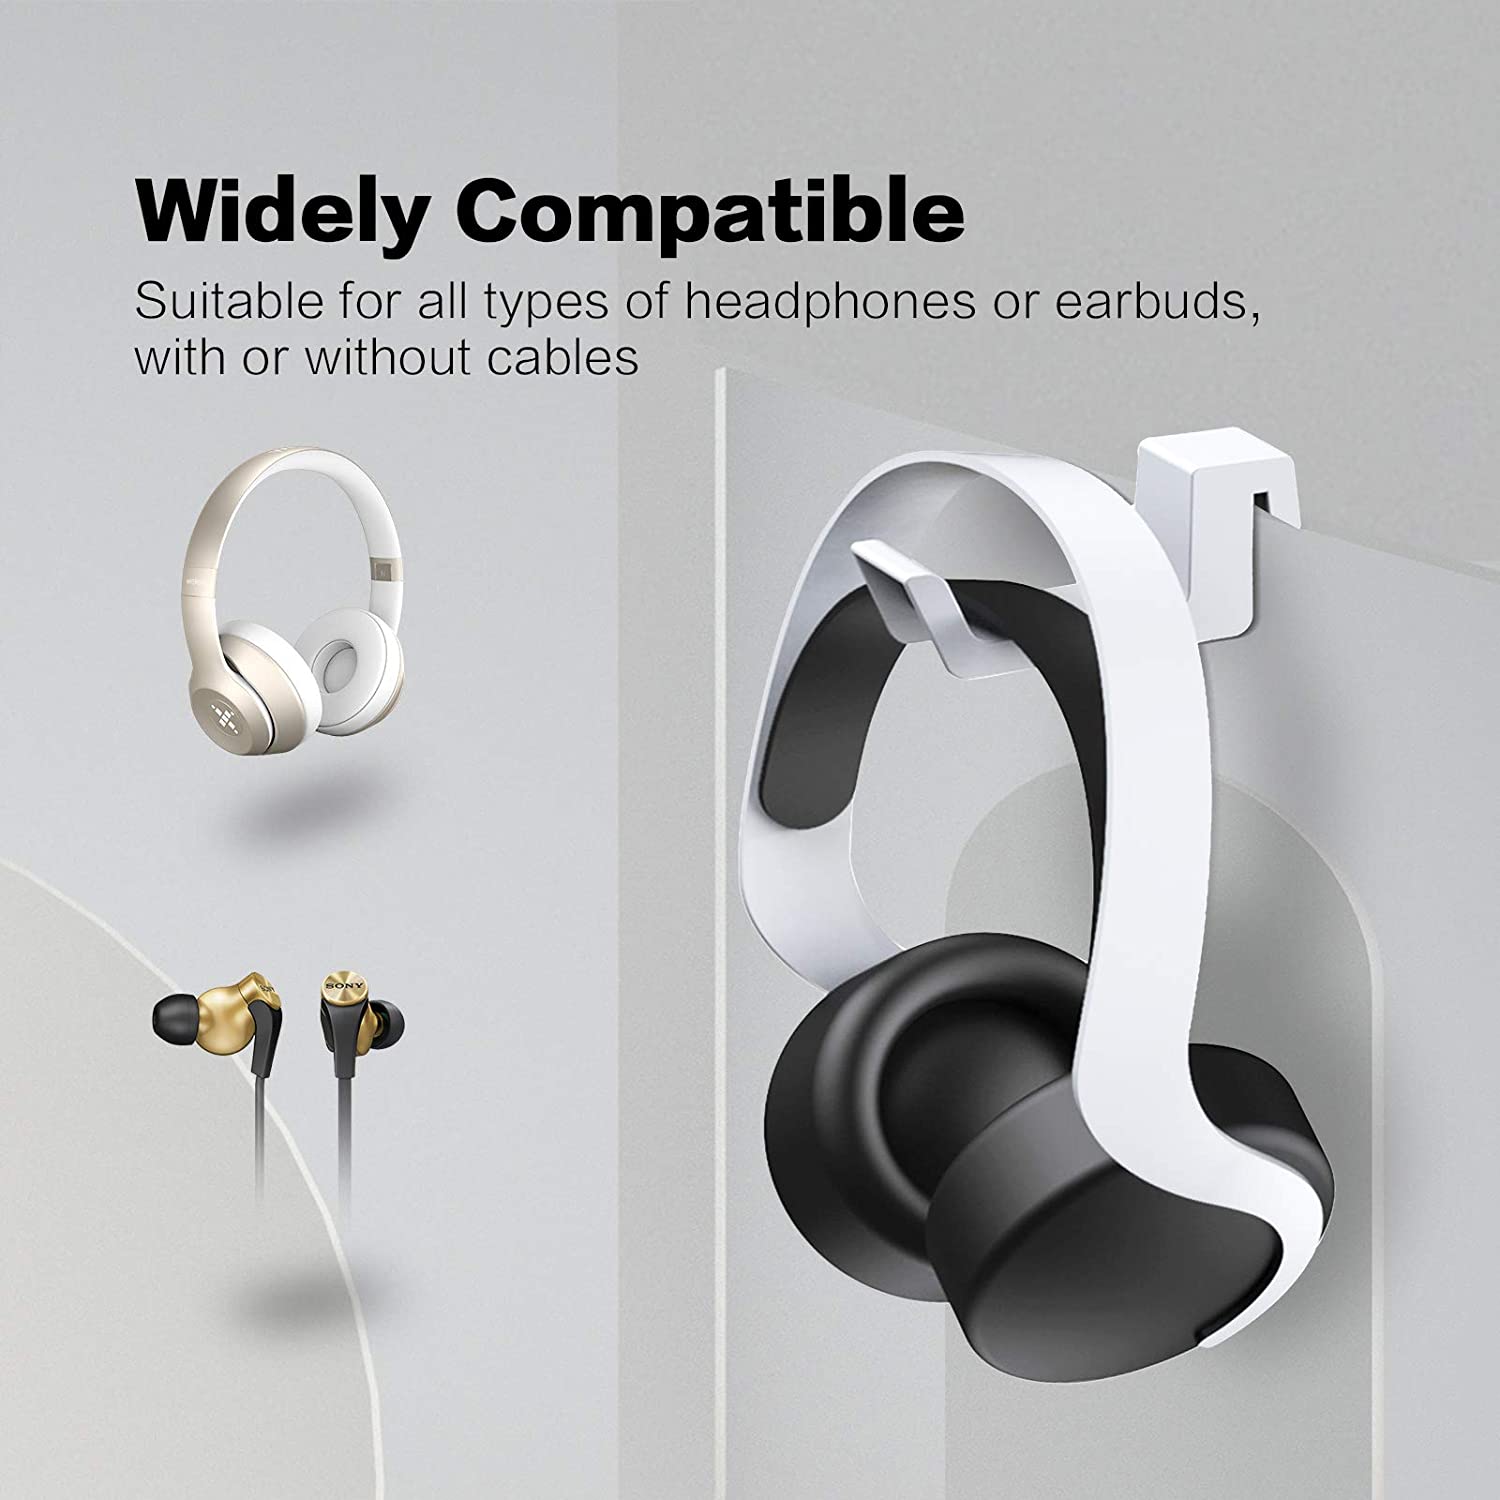 Compatible with all types of headphones, whether wired or wireless.